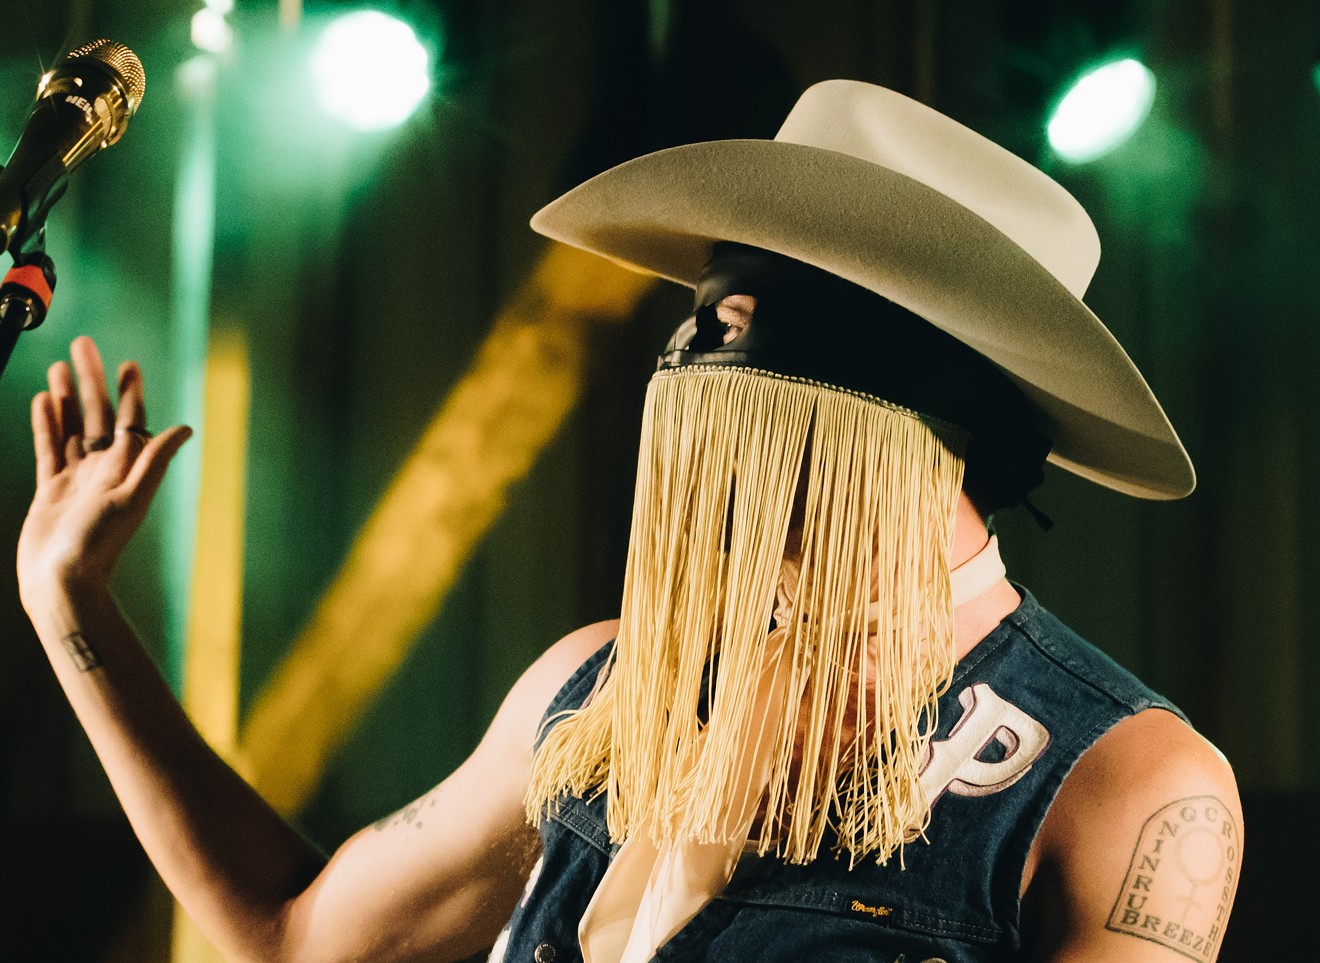 Orville Peck has been glamming up the world of country in the last few years, but the genre has a much deeper history of diversity.